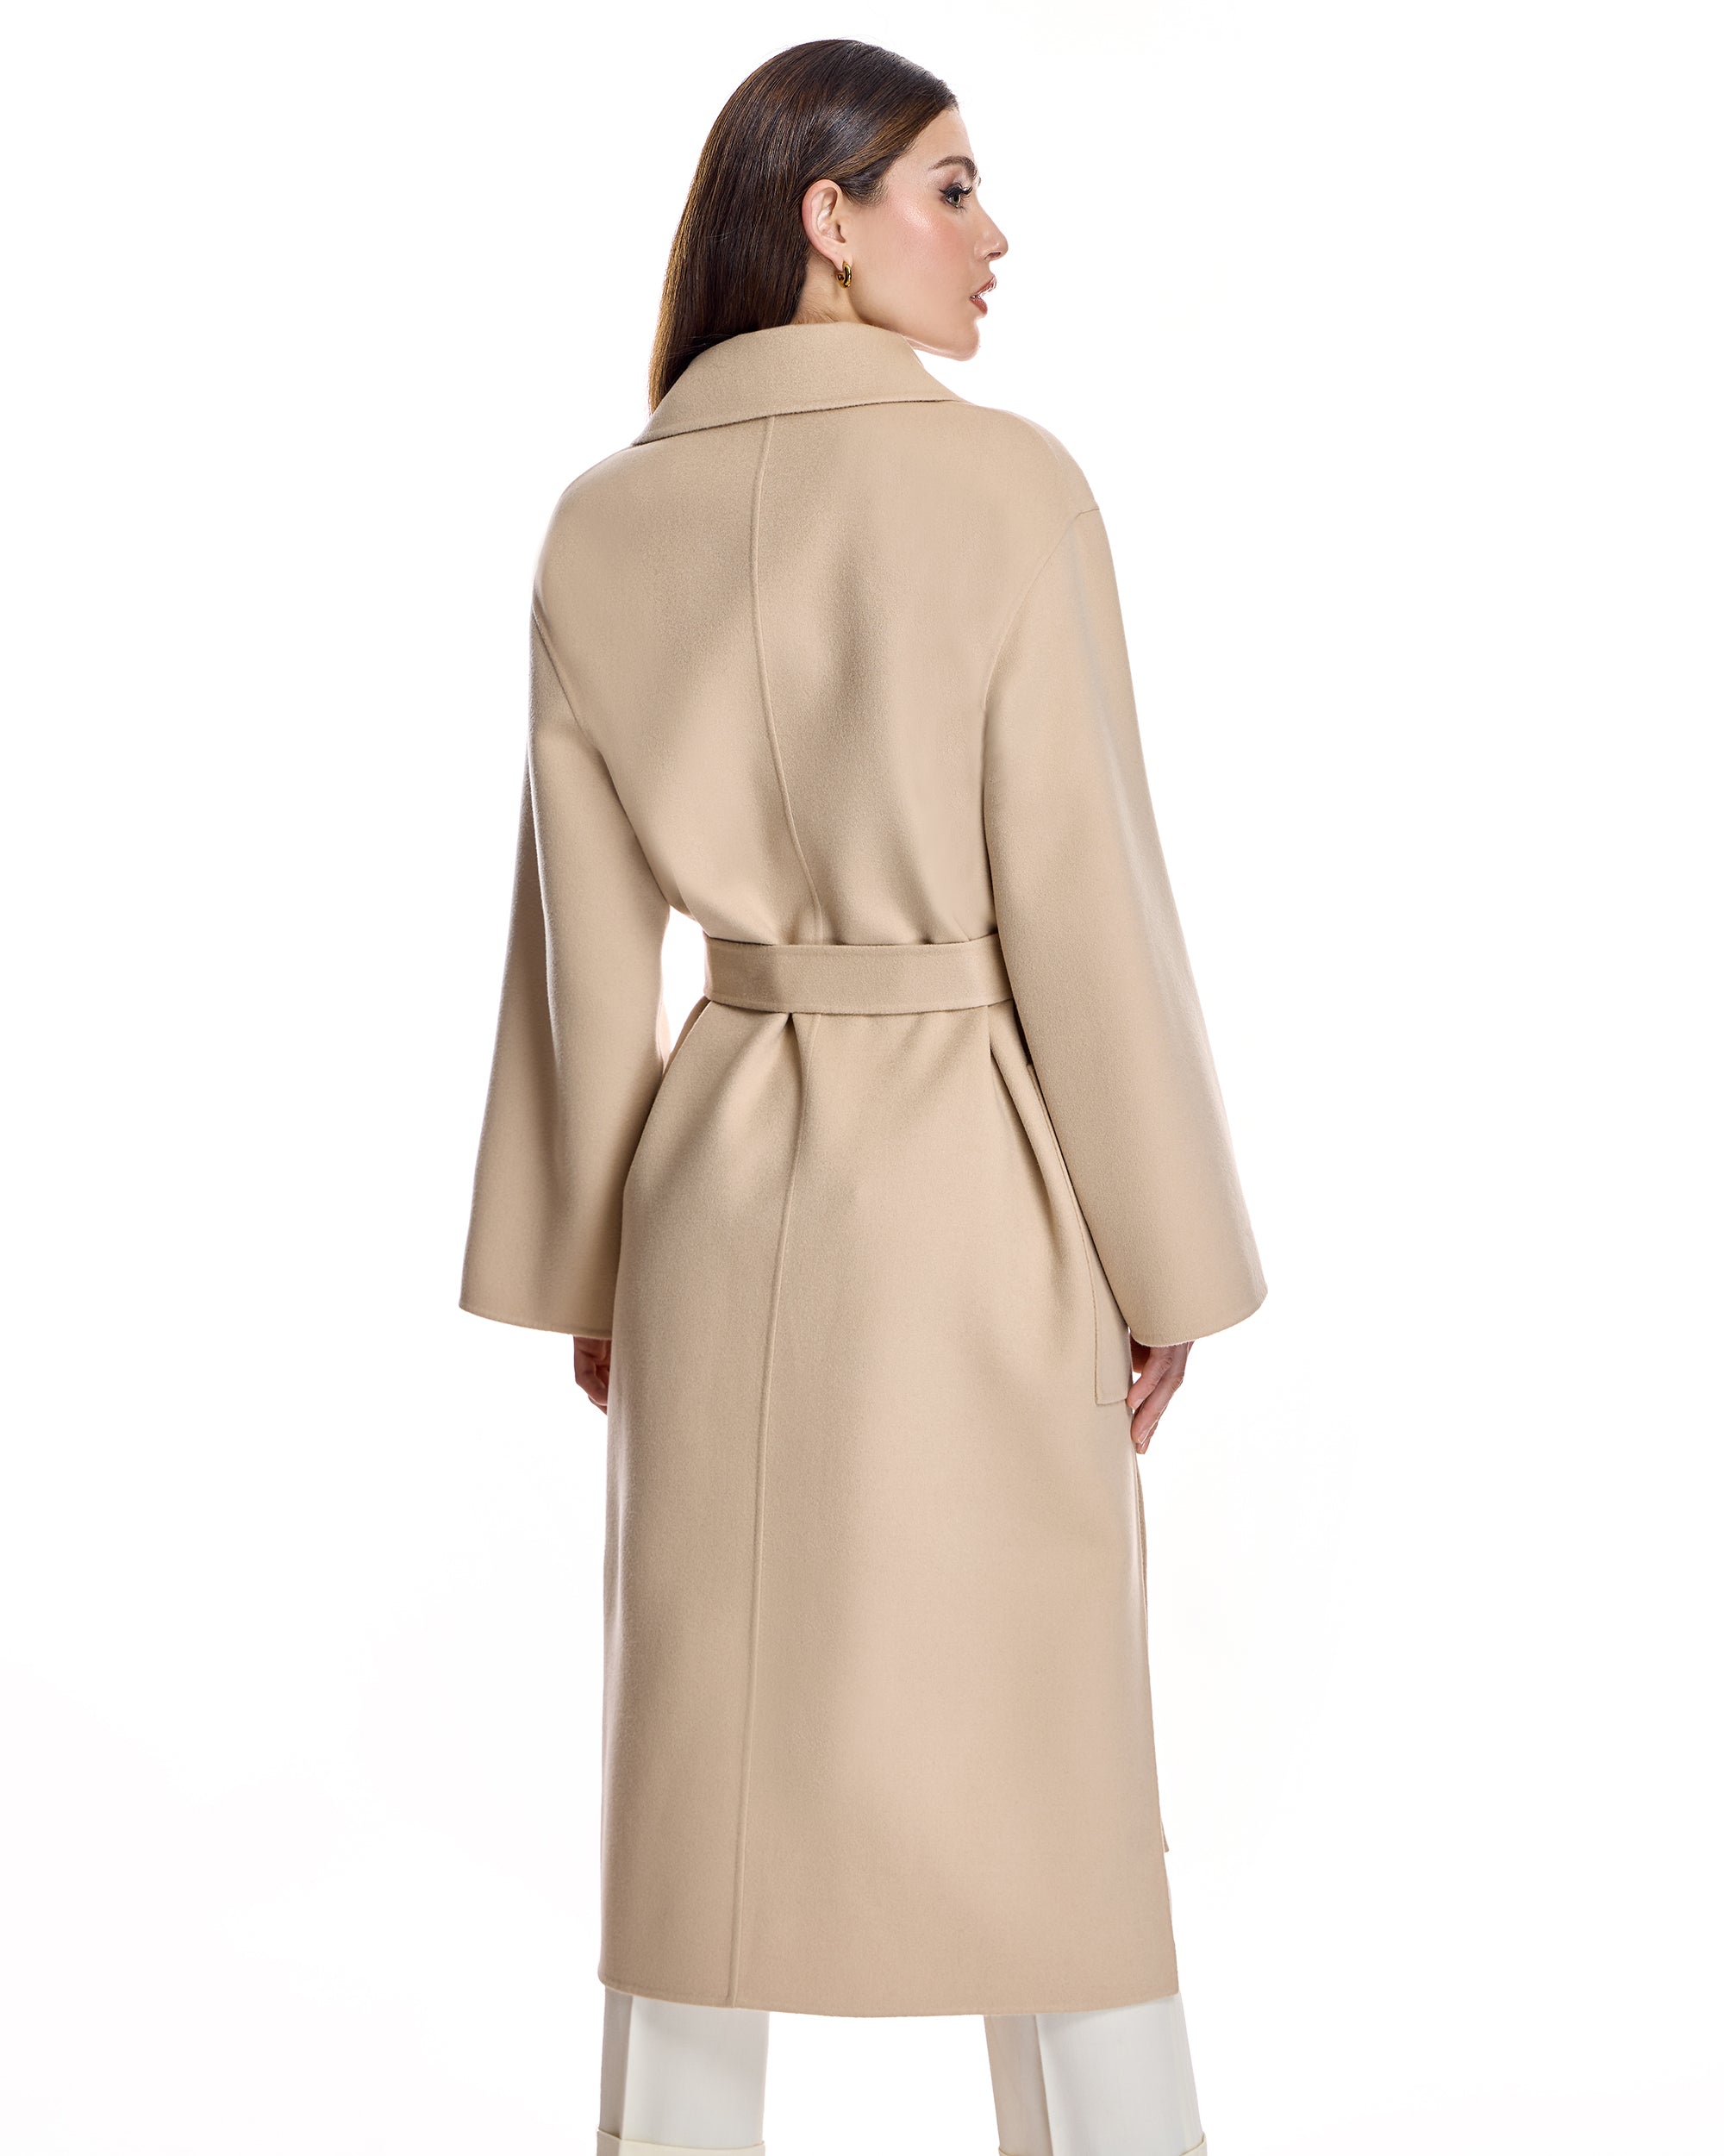 Wool blend Belted Trench Coat